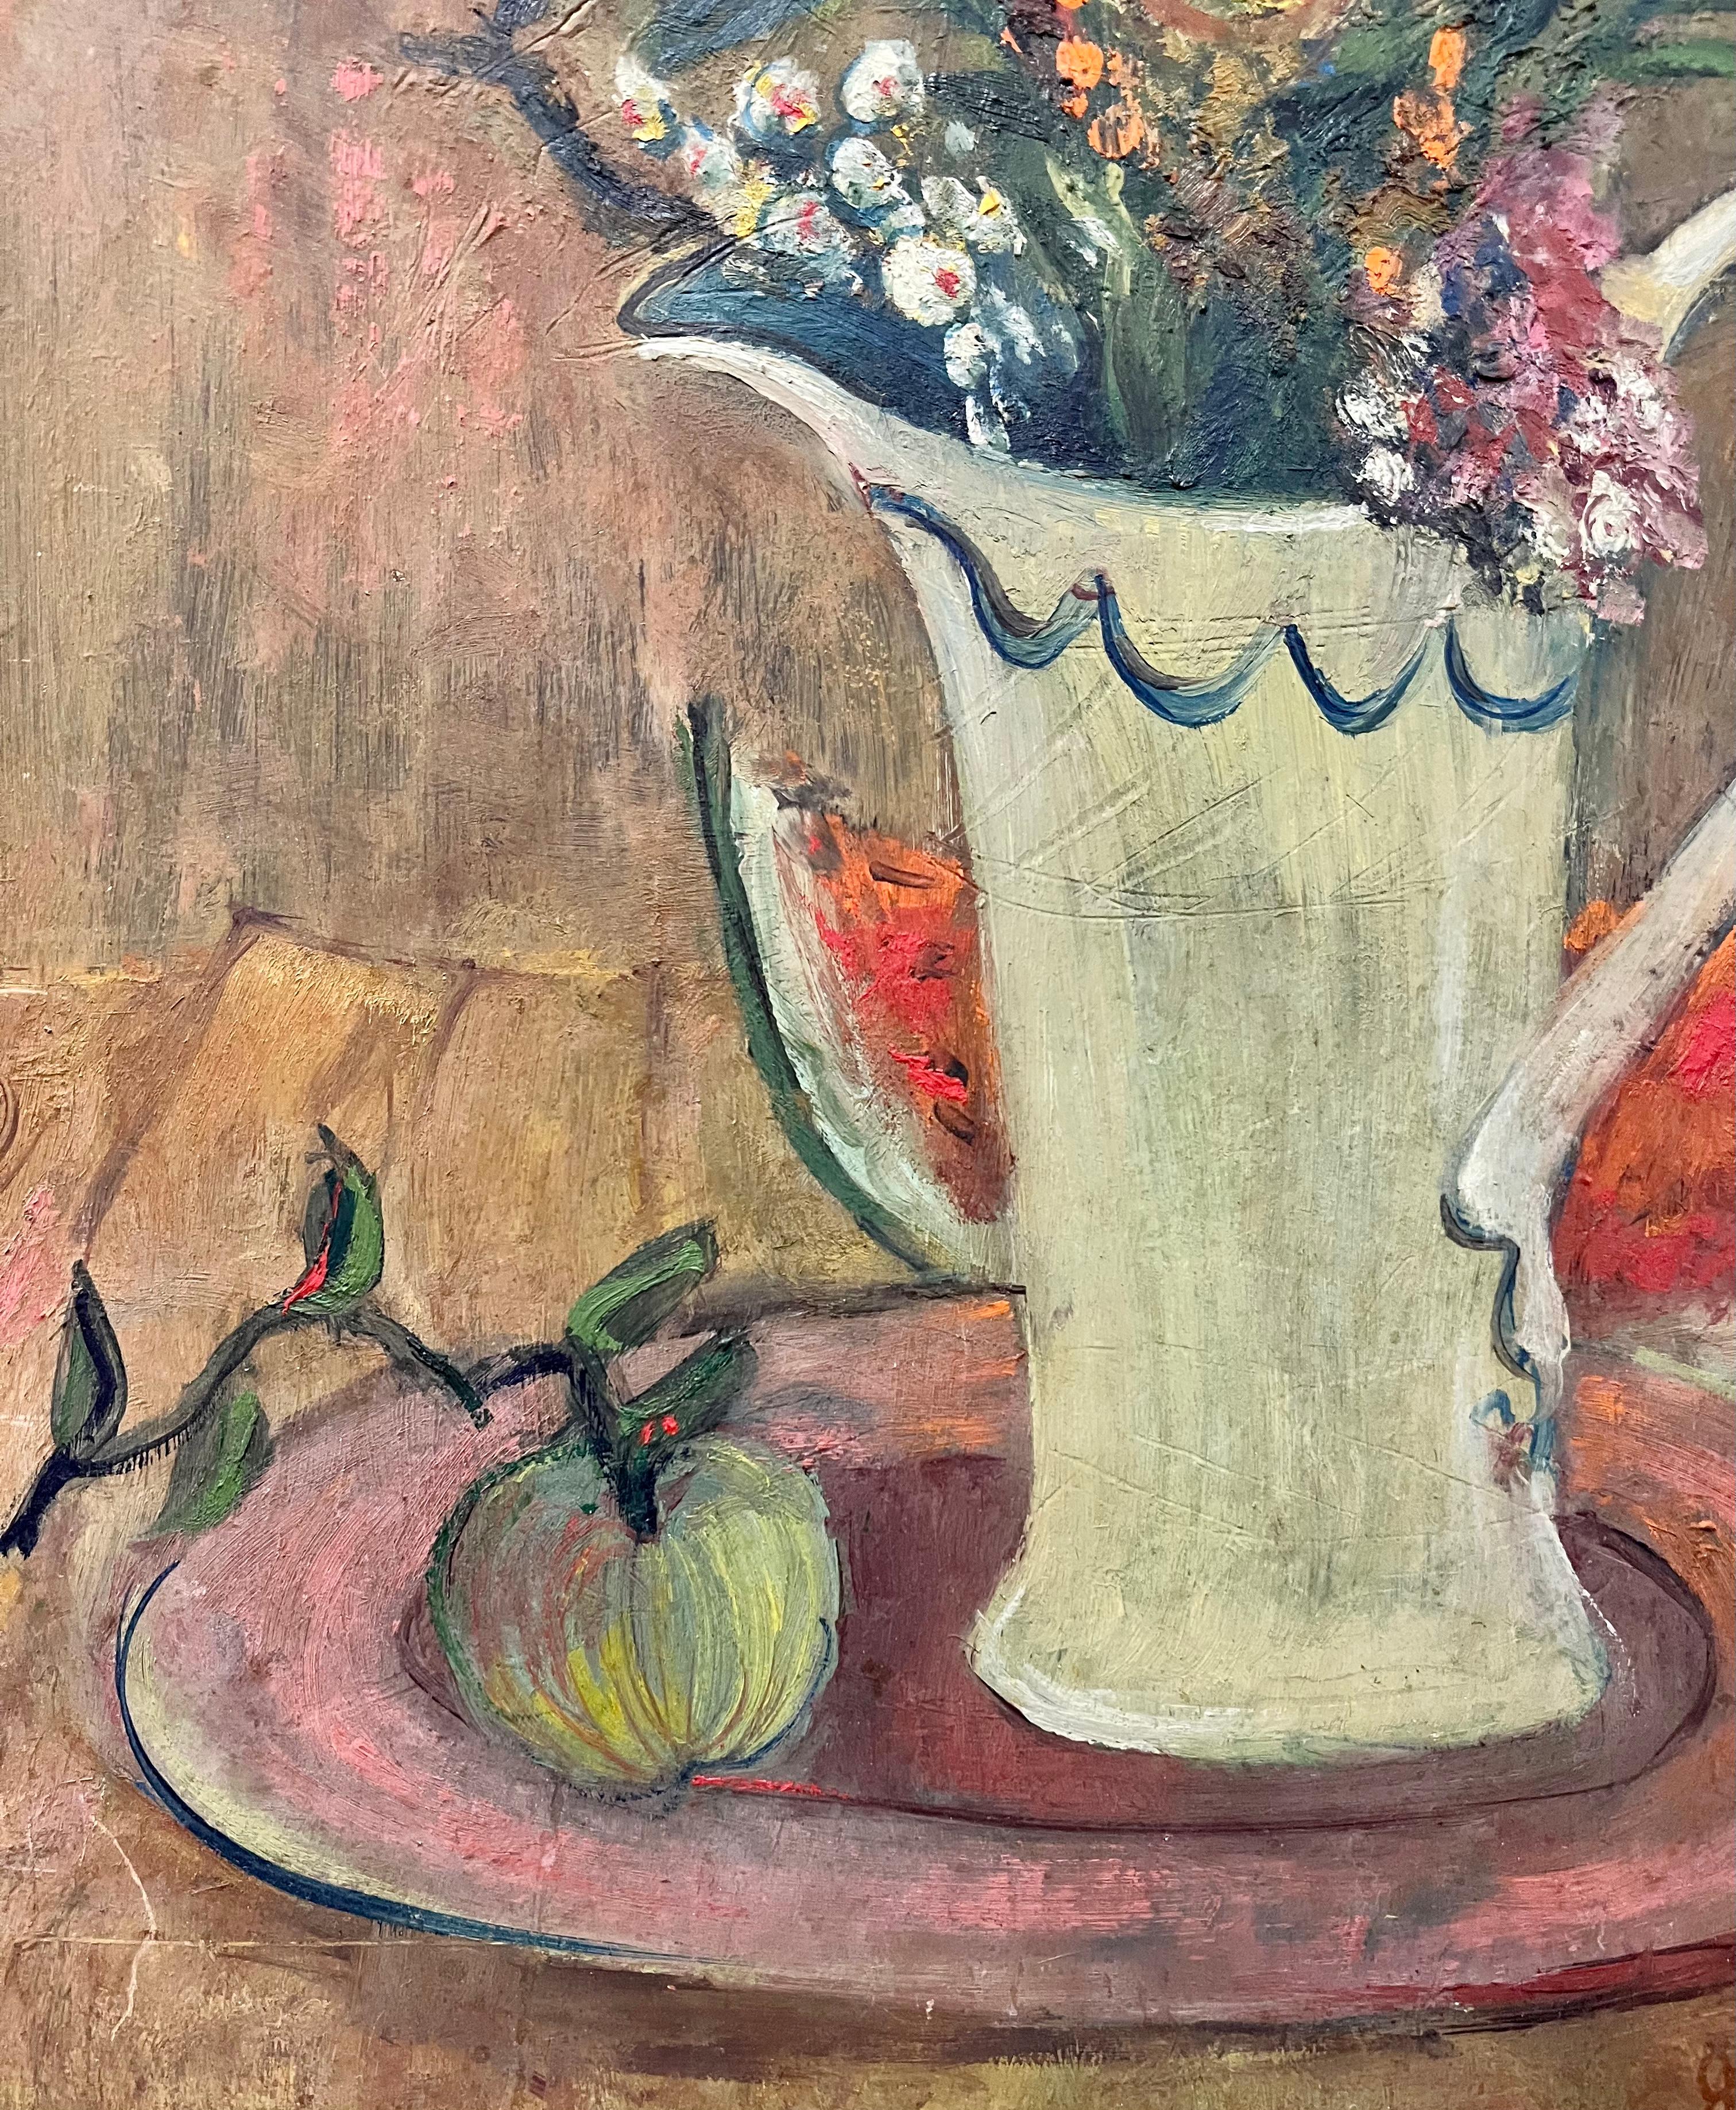 Up for sale is a Post Impressionist , Still life by Jane Wilson (1924-2015). Jane wilson was an important female Abstract Expressionists painter. She has been exhibited in many museums, including the Moma and Metropolitan Museum and Whitney Museum.